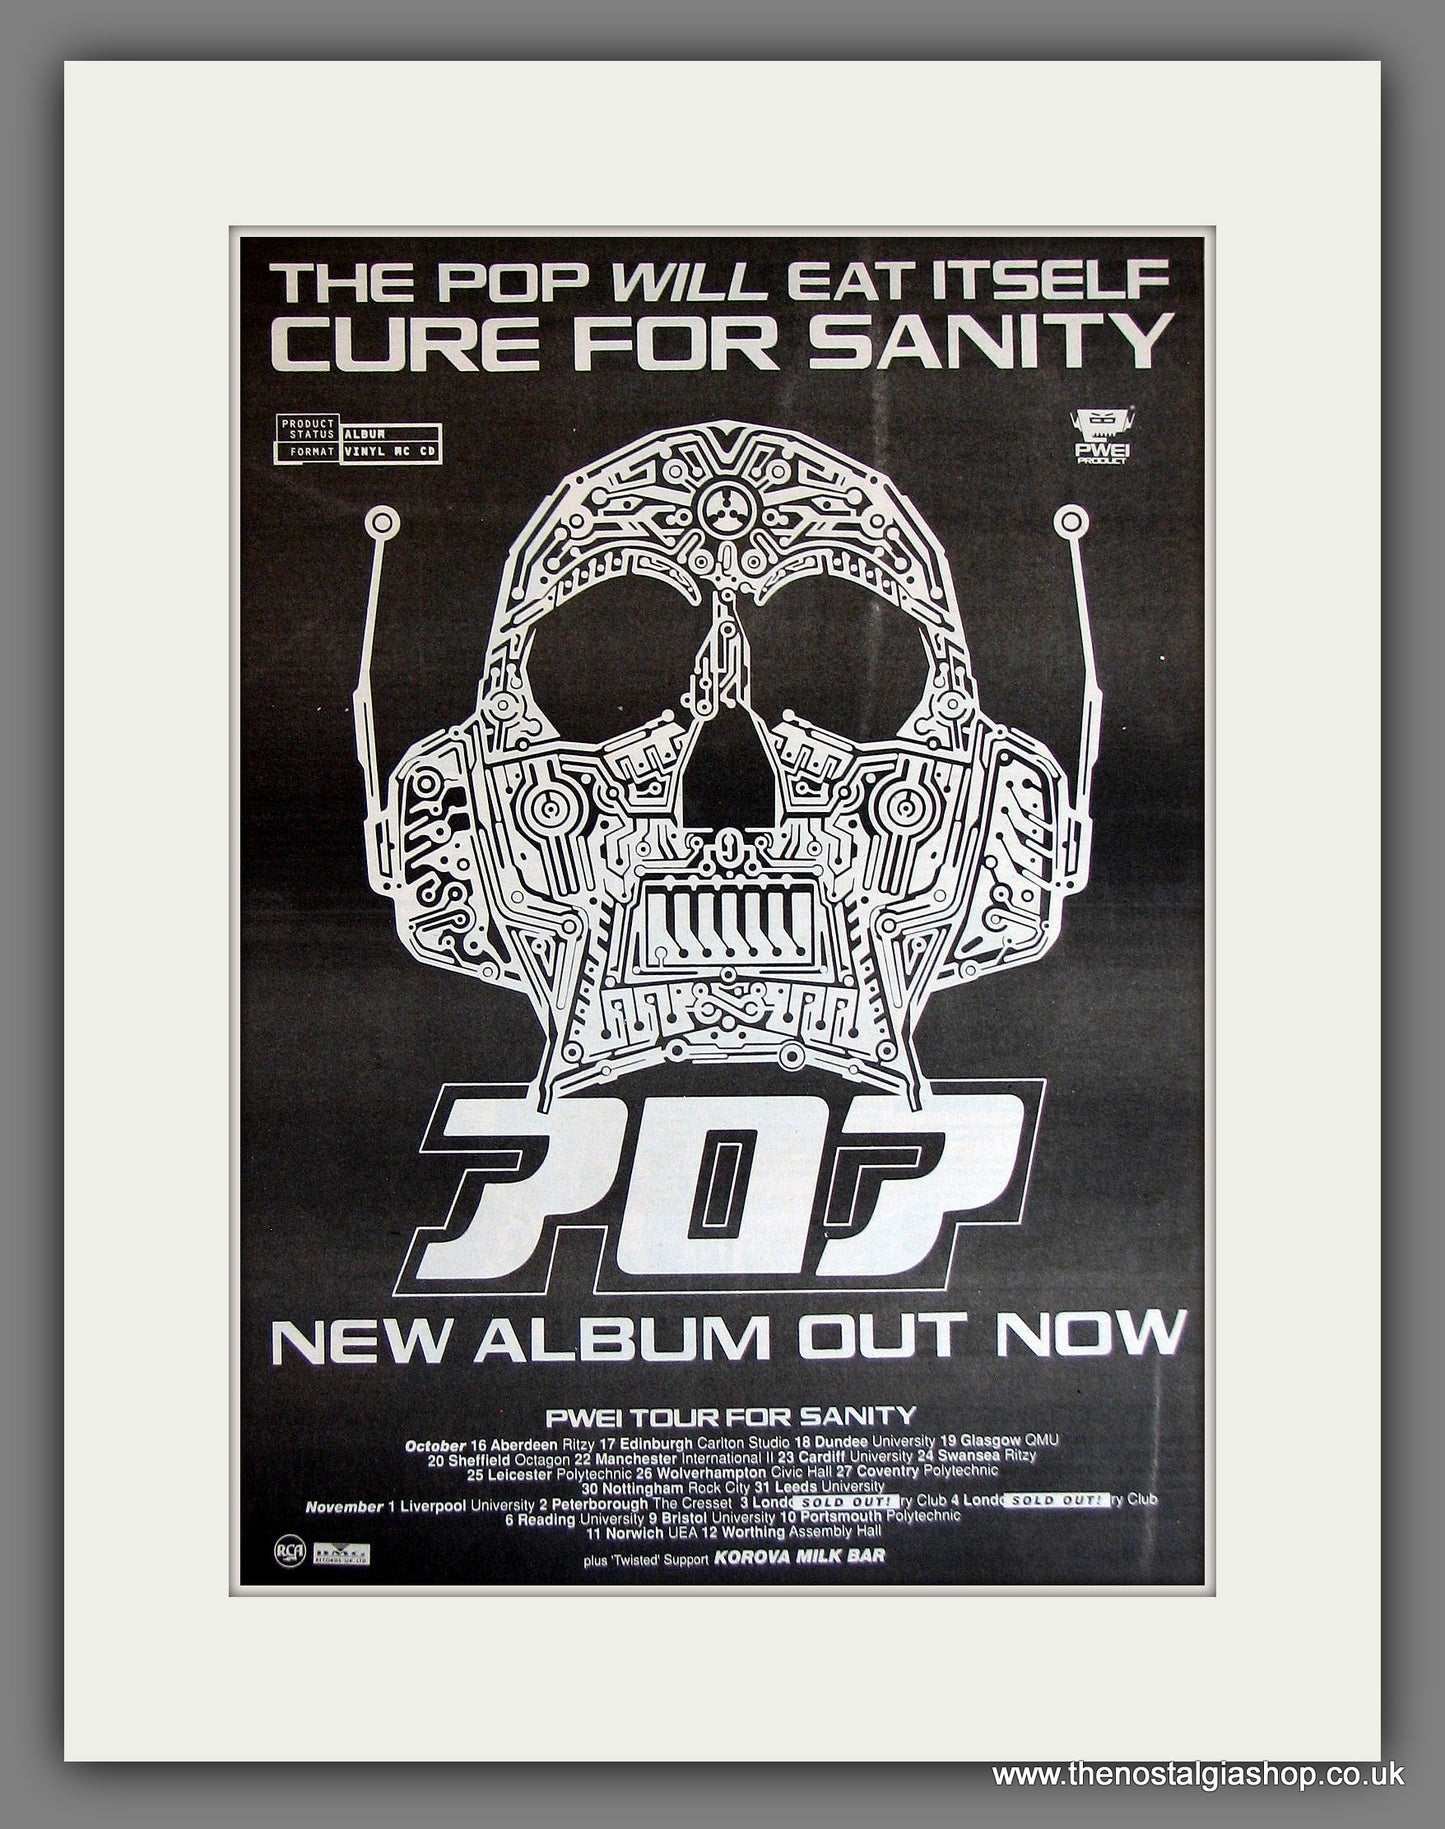 Pop Will Eat Itself Cure For Sanity. Original Advert 1990 (ref AD13771)